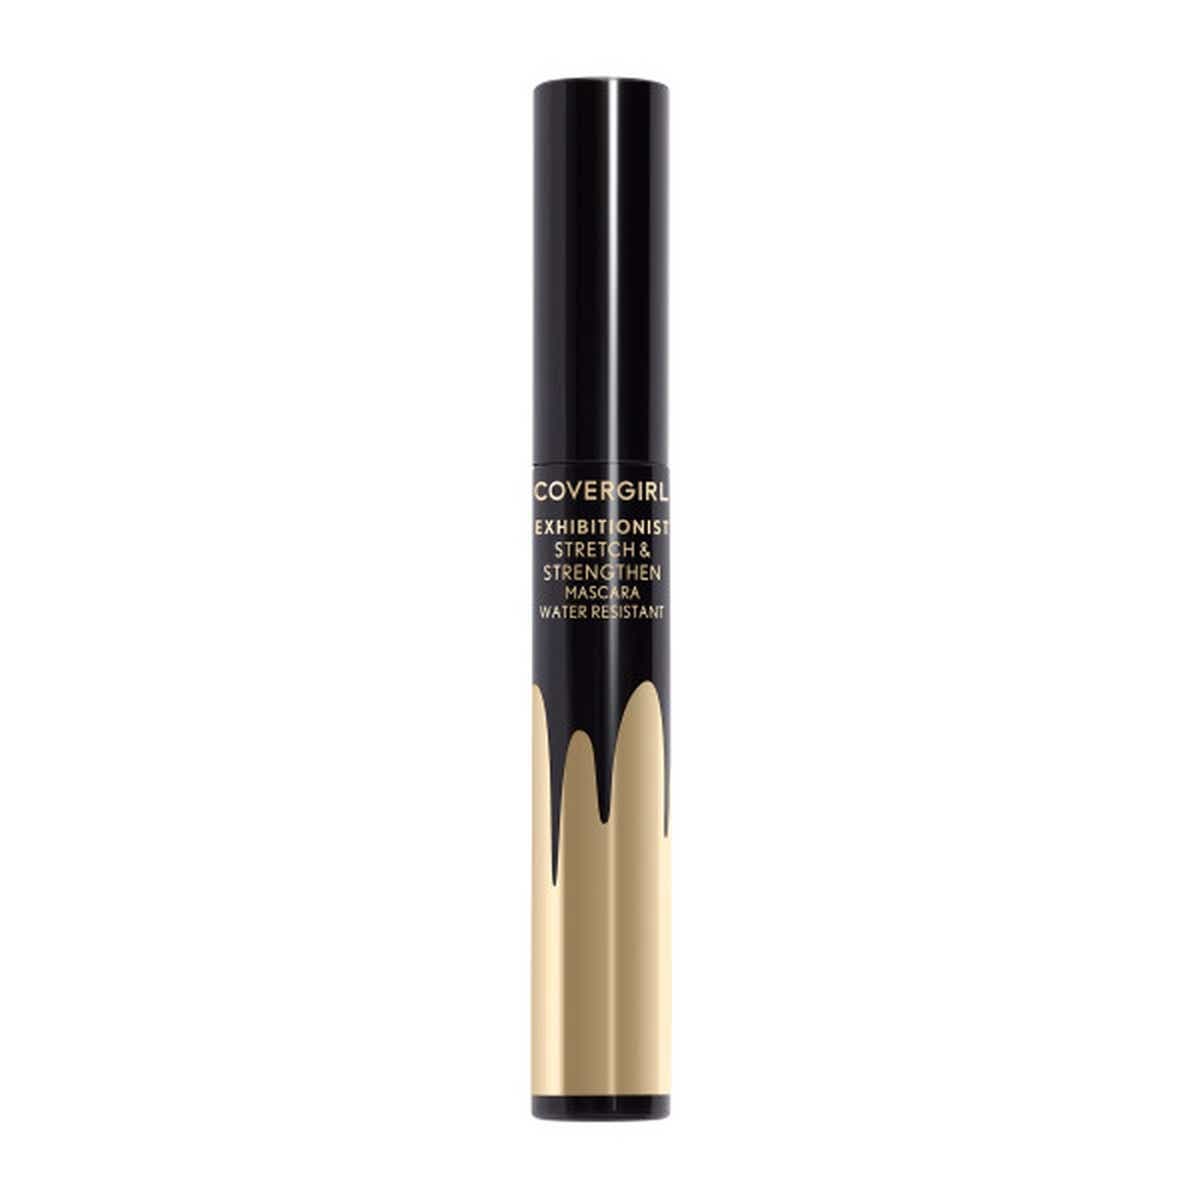 Exhibitionist Stretch & Strengthen Water-Resistant Mascara